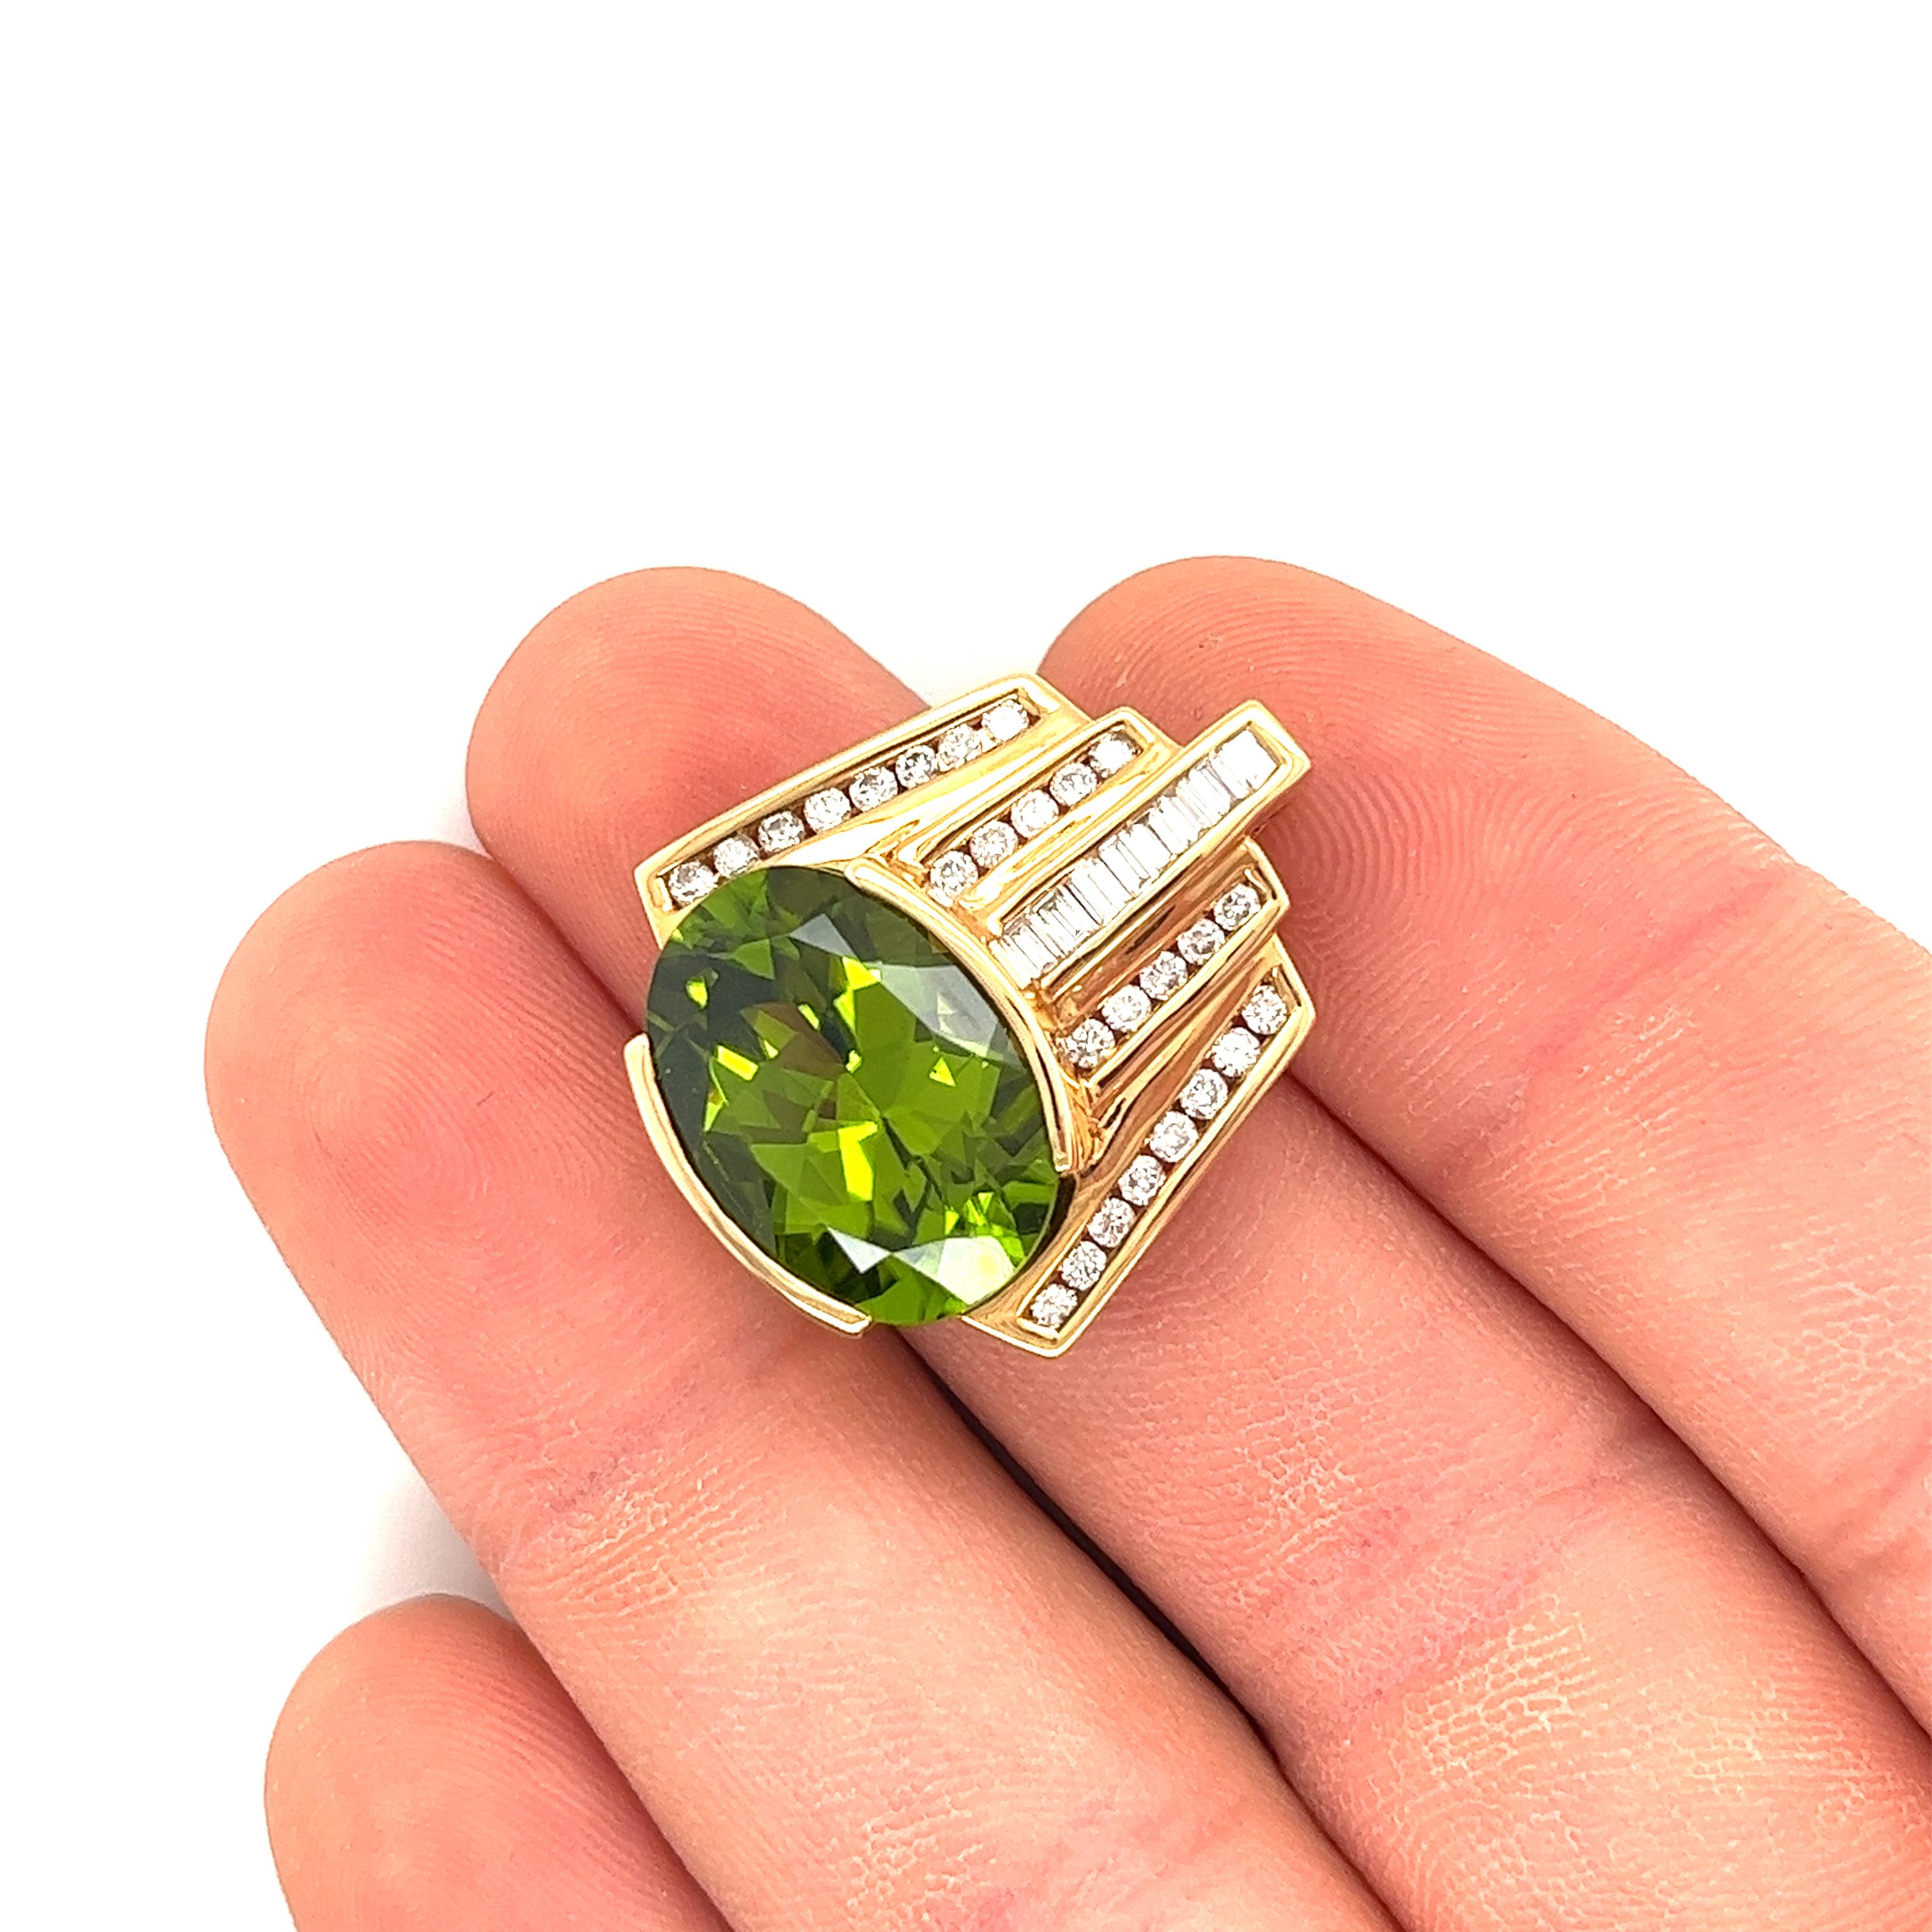 Vintage pendant, with an oval cut green peridot center stone, this pendant is paired with diamond side stones. Secured through channel setting, these baguette and round cut diamonds are placed with an intricate geometric design of white and yellow